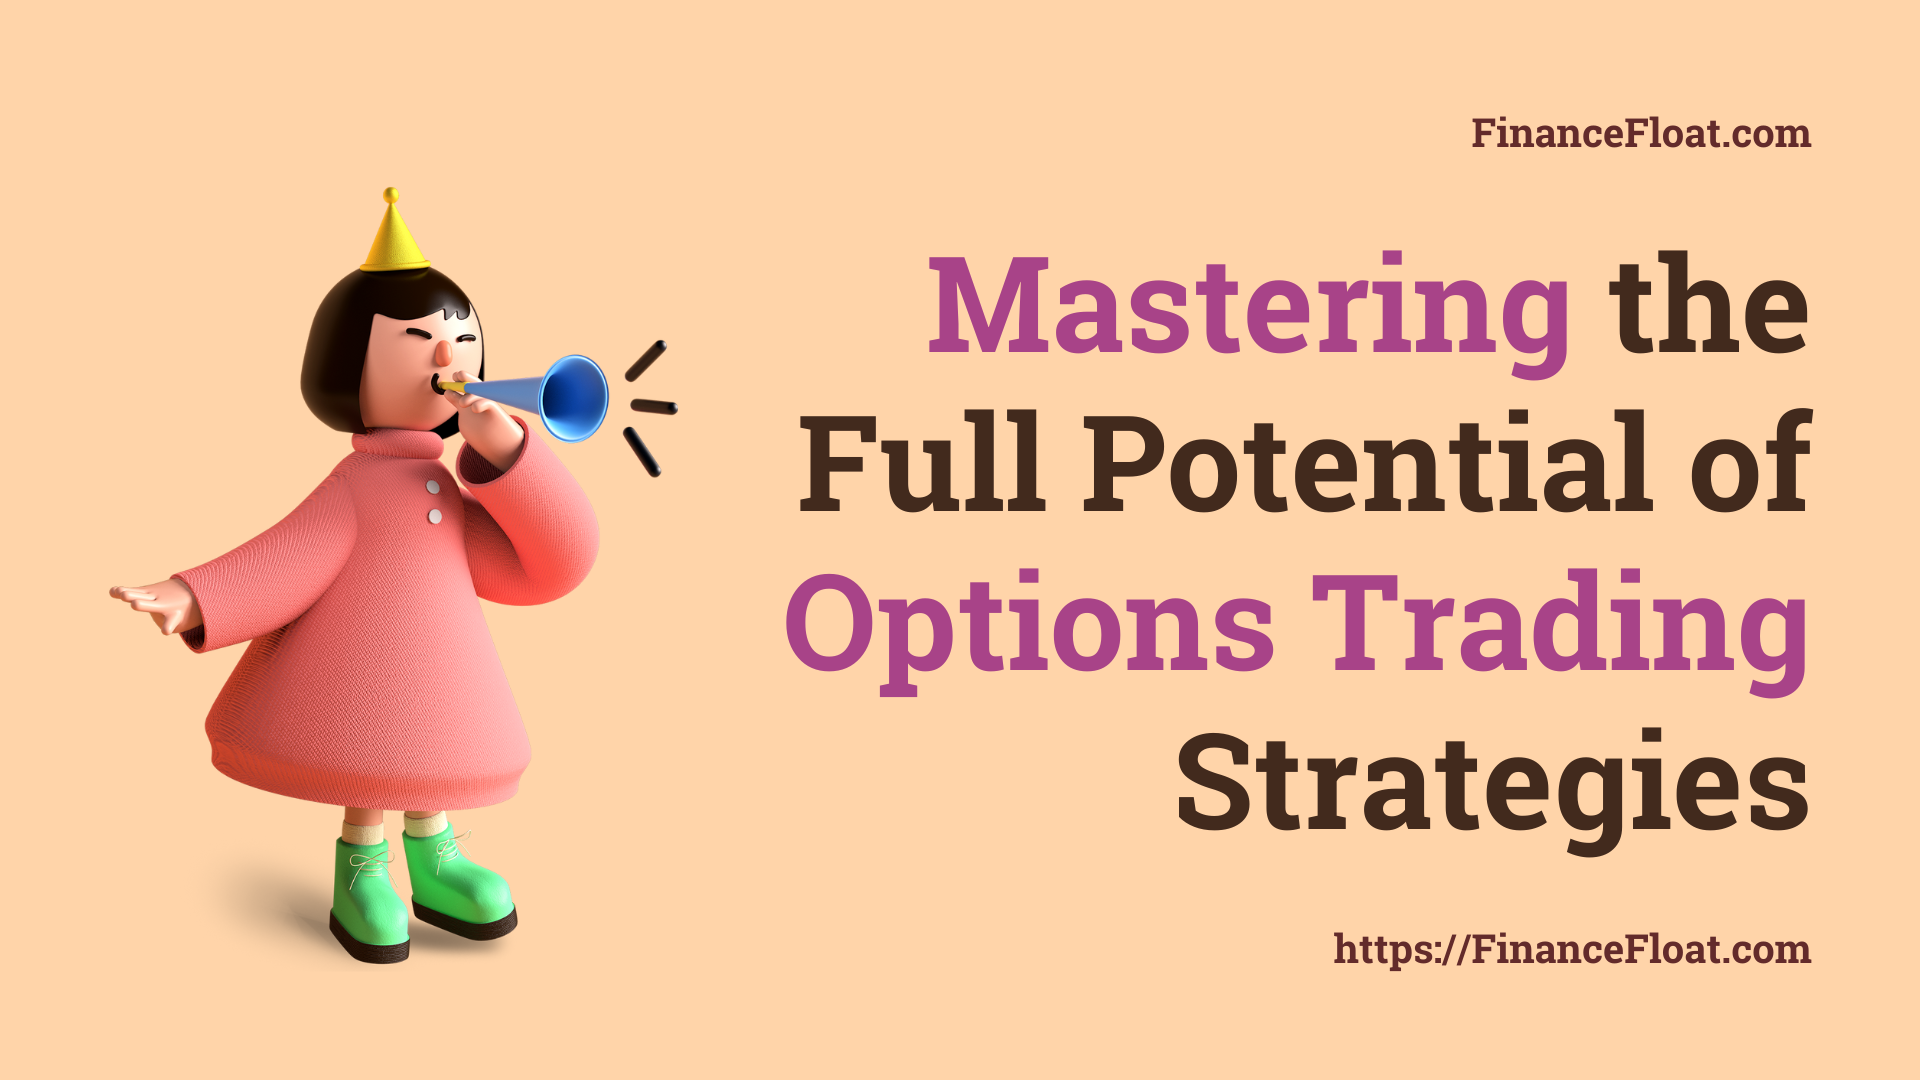 Mastering the Full Potential of Options Trading Strategies